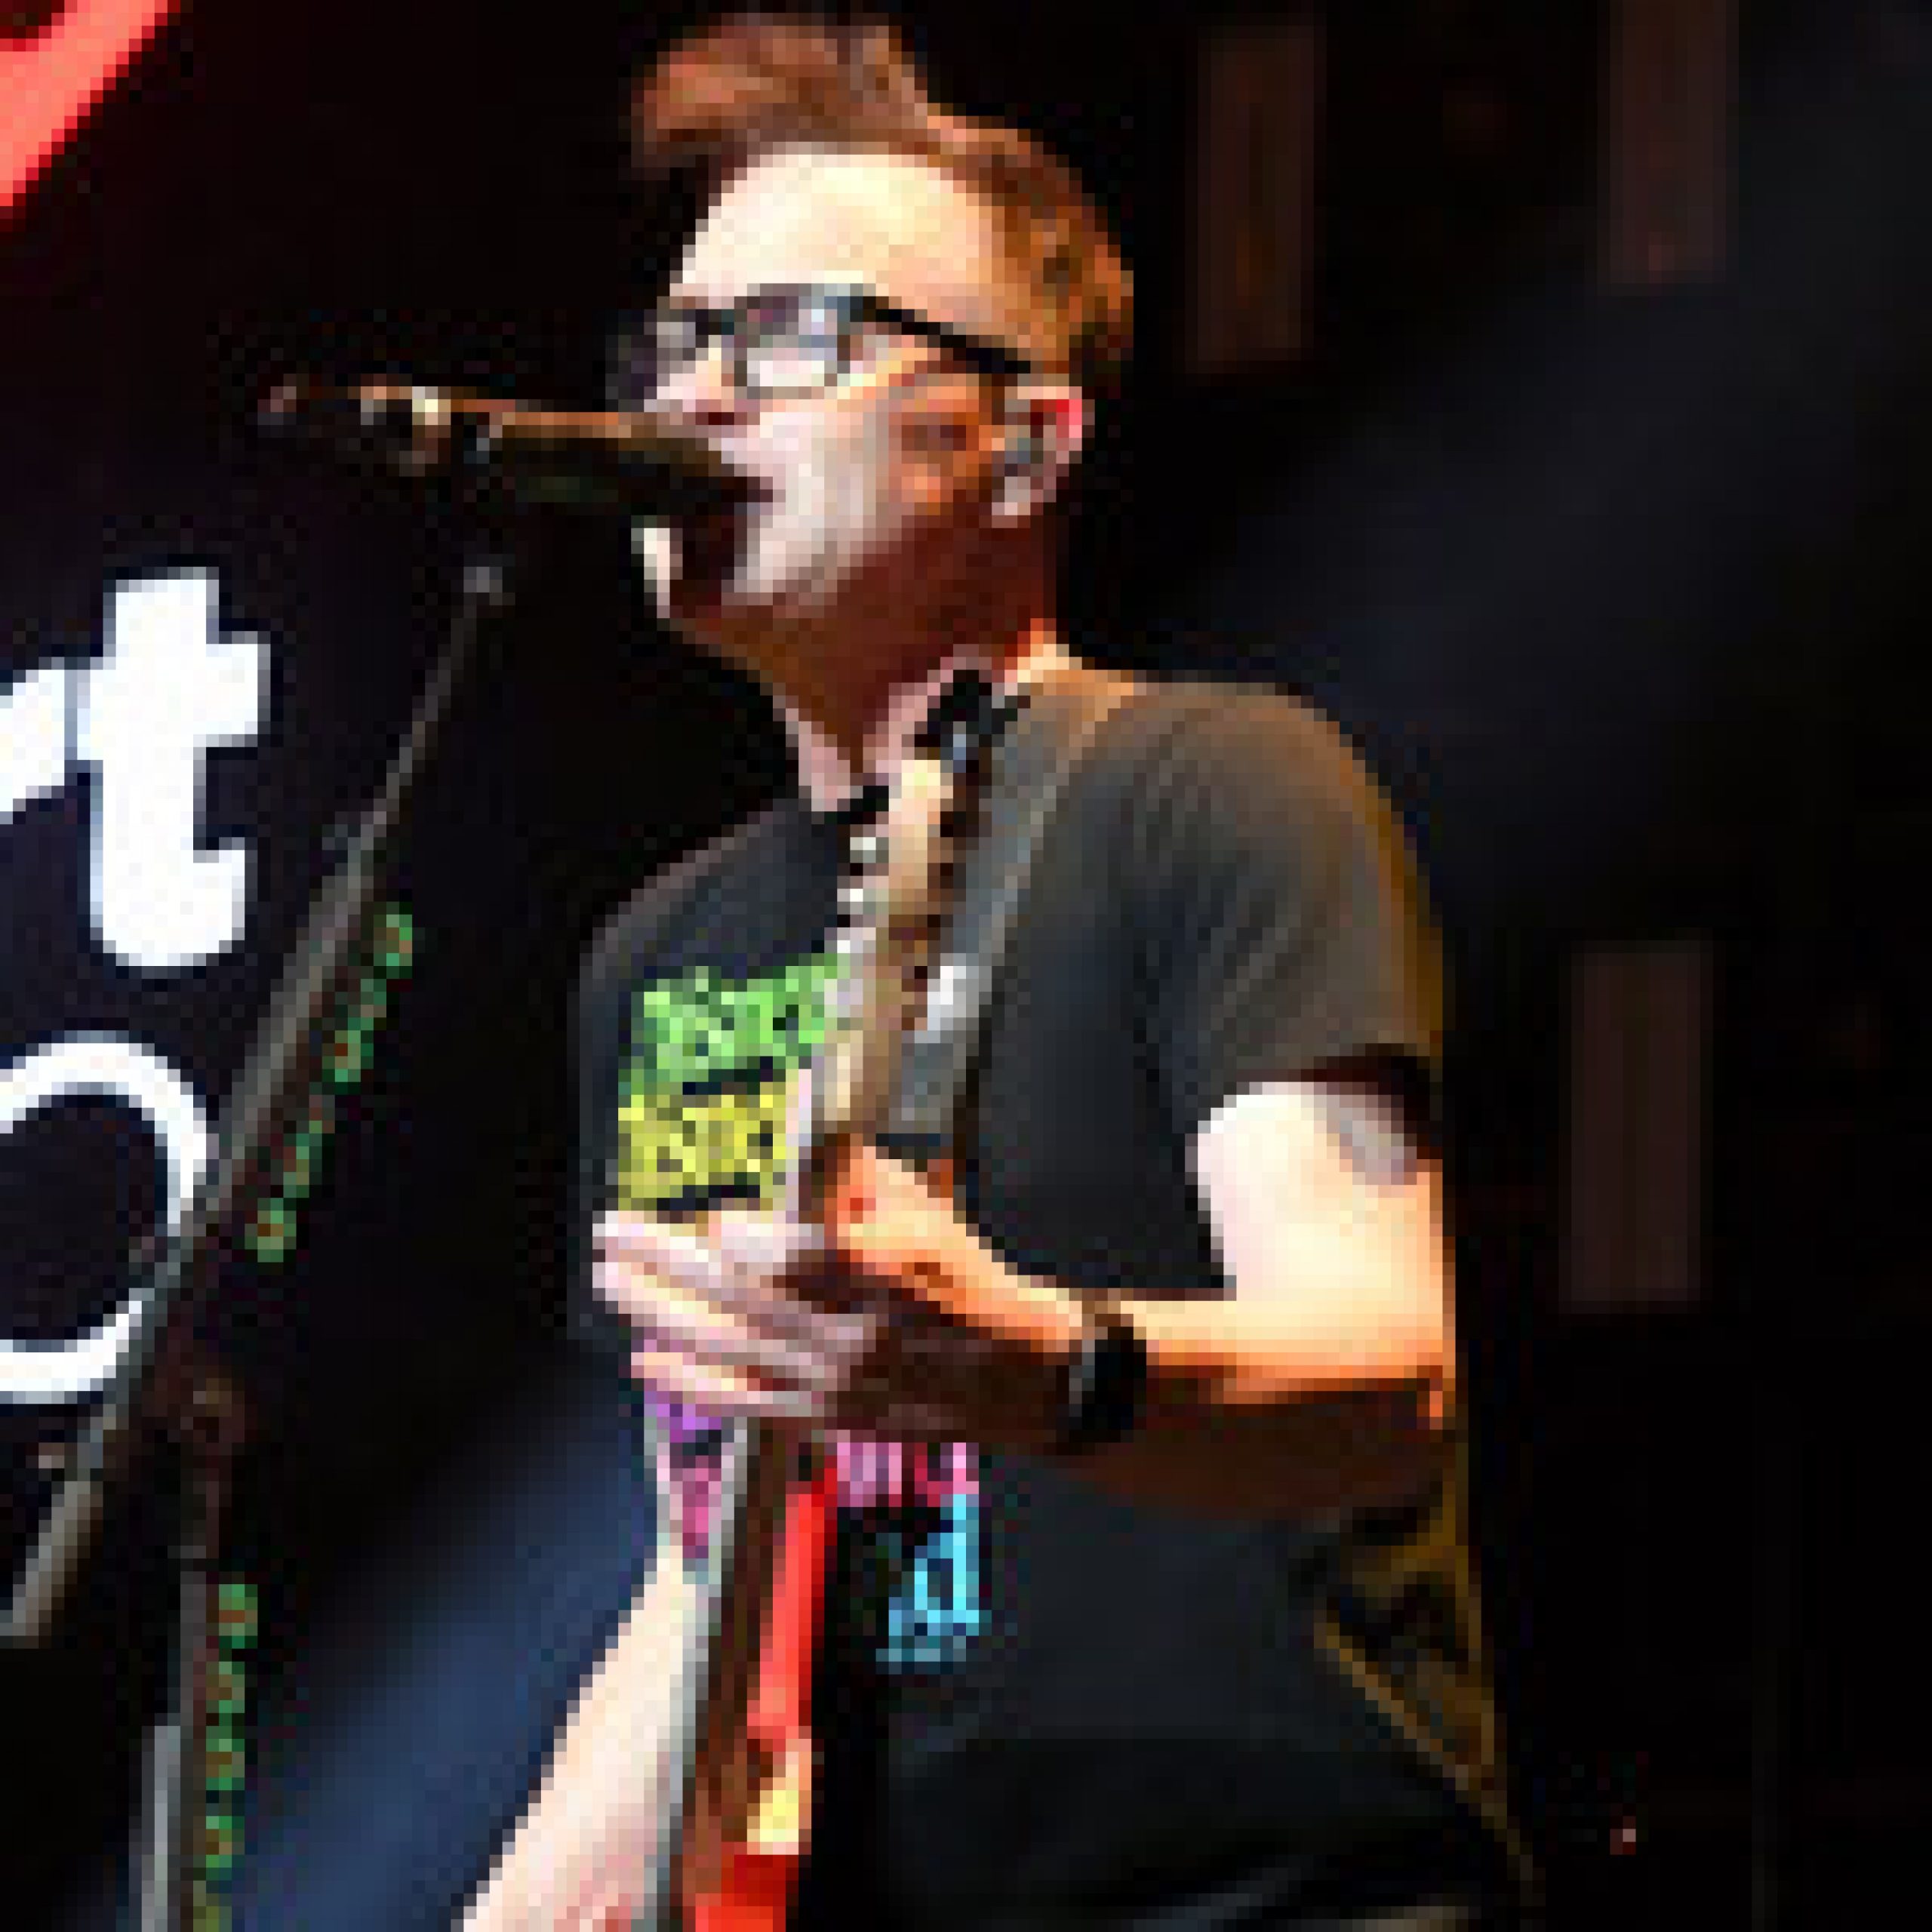 Blink-182’s Mark Hoppus Shares Post-Chemotherapy Photo After Cancer Diagnosis